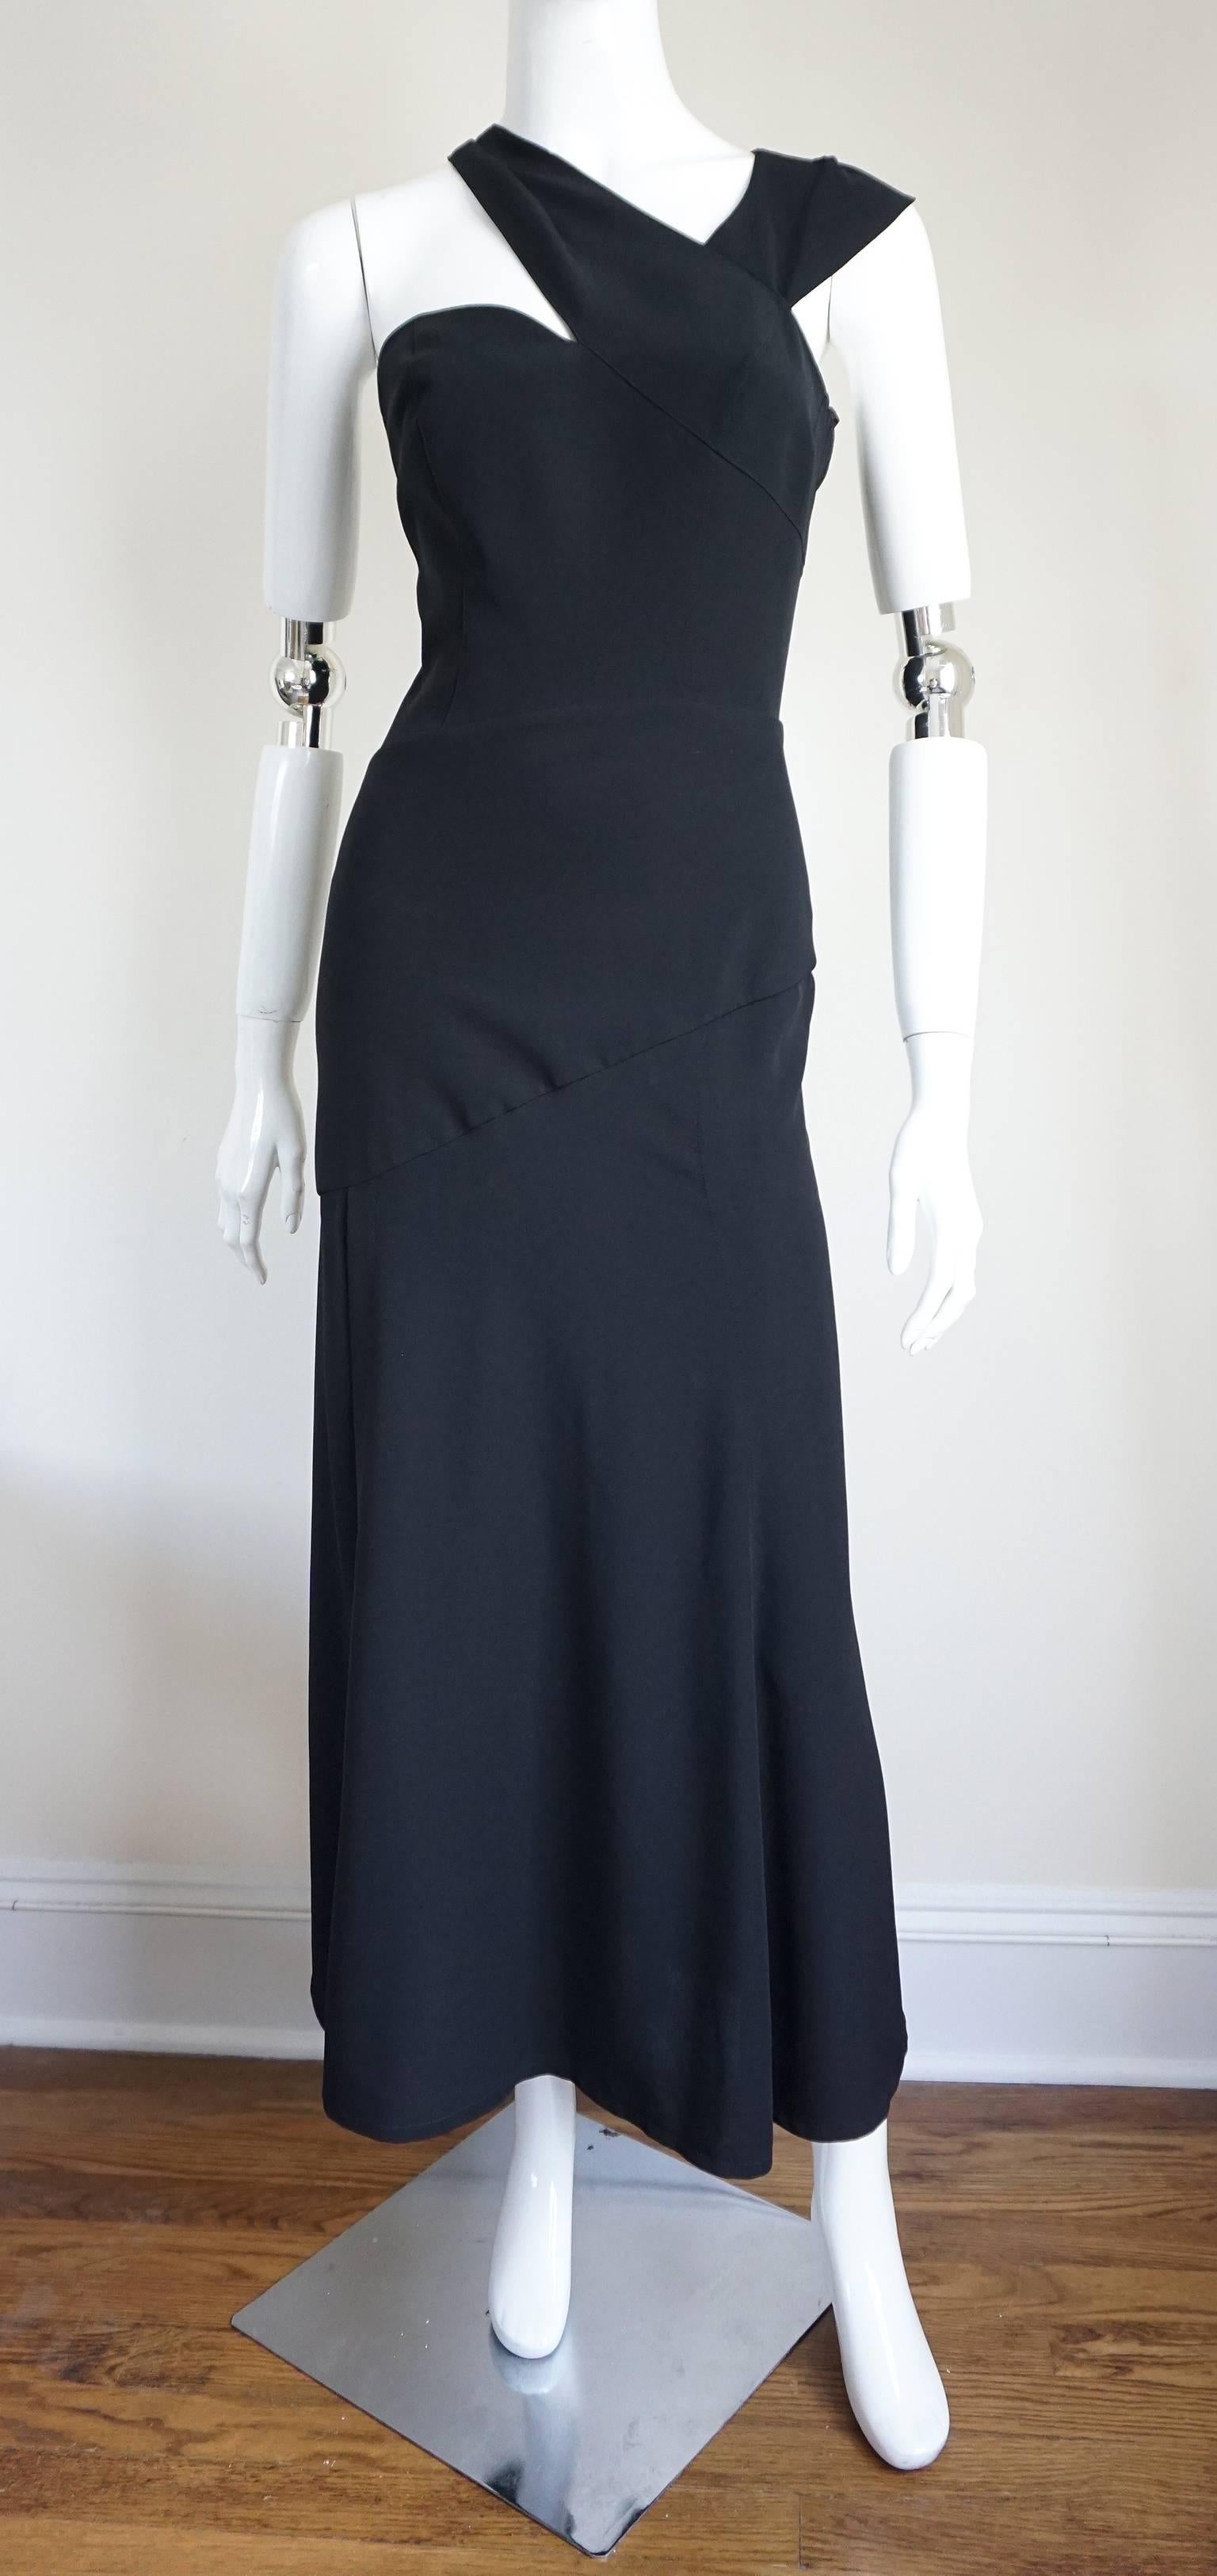 This MUGLER is made of black crepe, which is cut to form to the body. The seam details accentuate the female form. The sweetheart neckline is accented by the double straps that sit on either of the neck. They connect at the back and accented with a